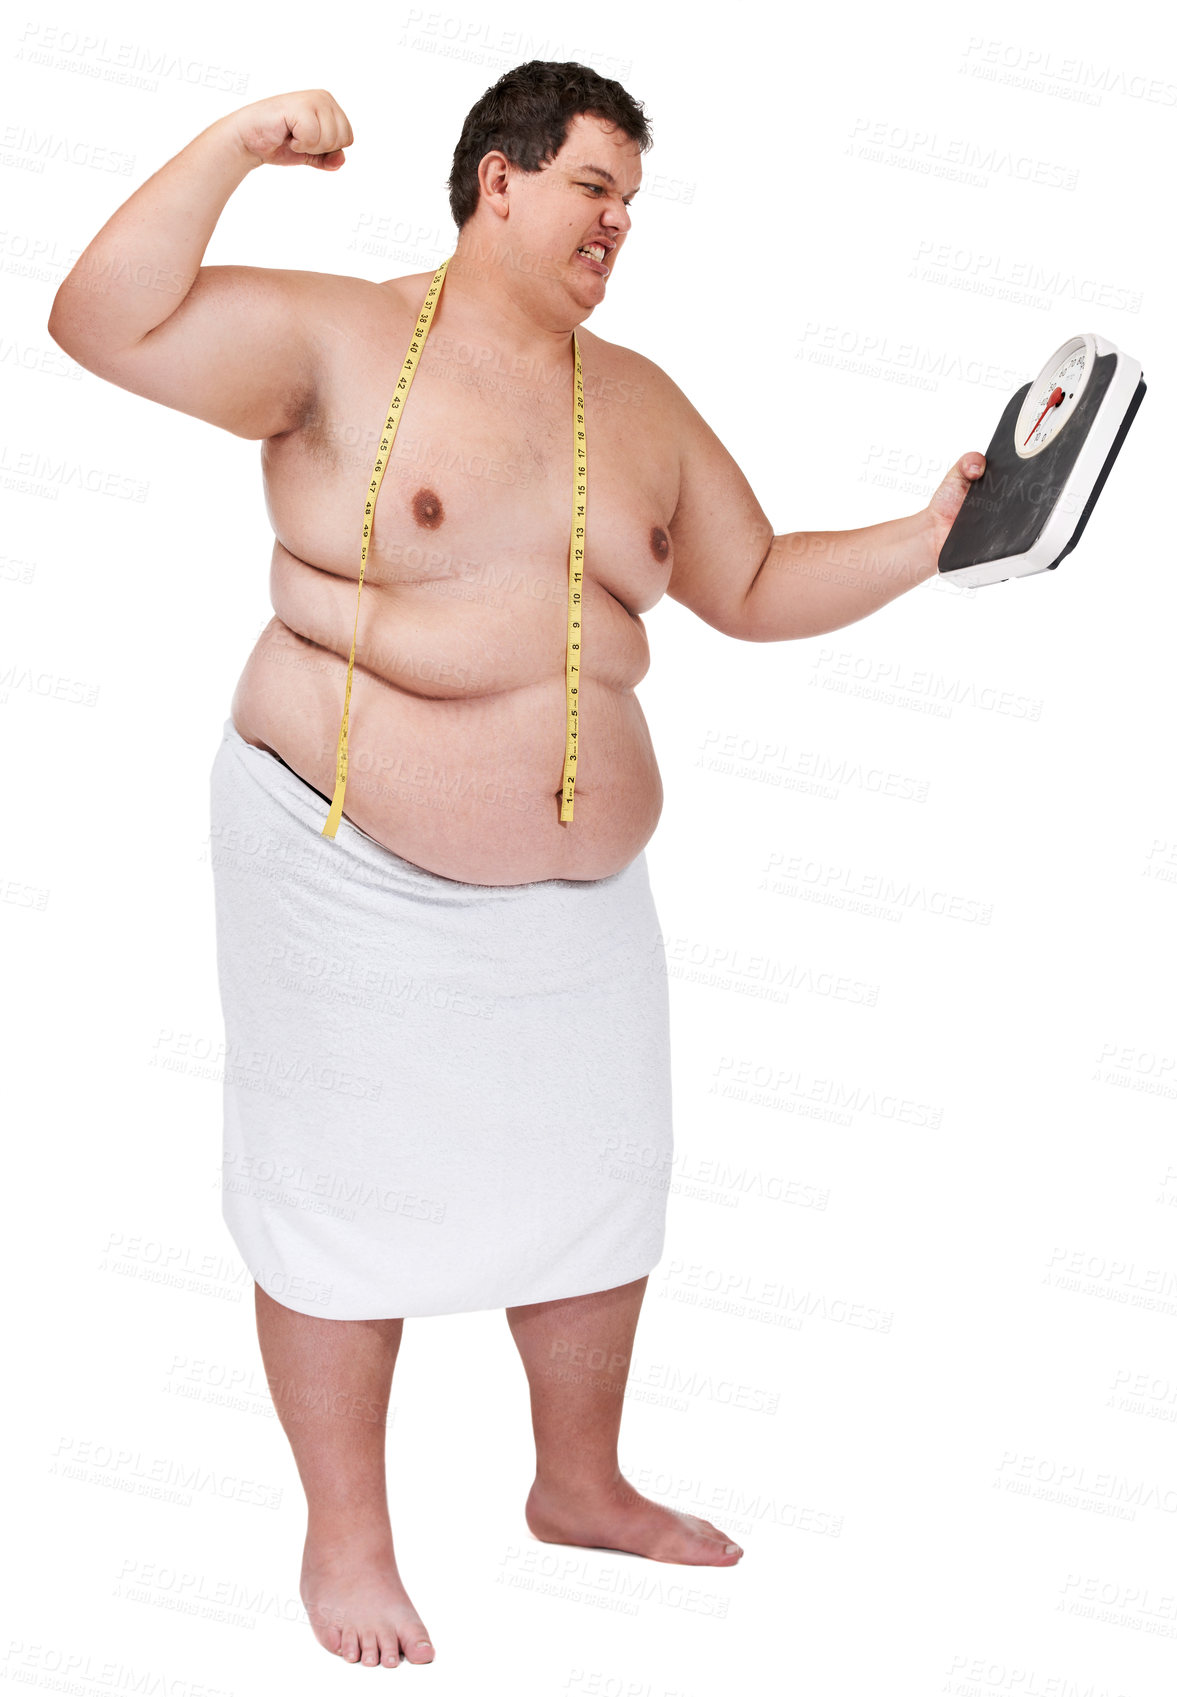 Buy stock photo An overweight young man looking angry and about to punch a weight scale